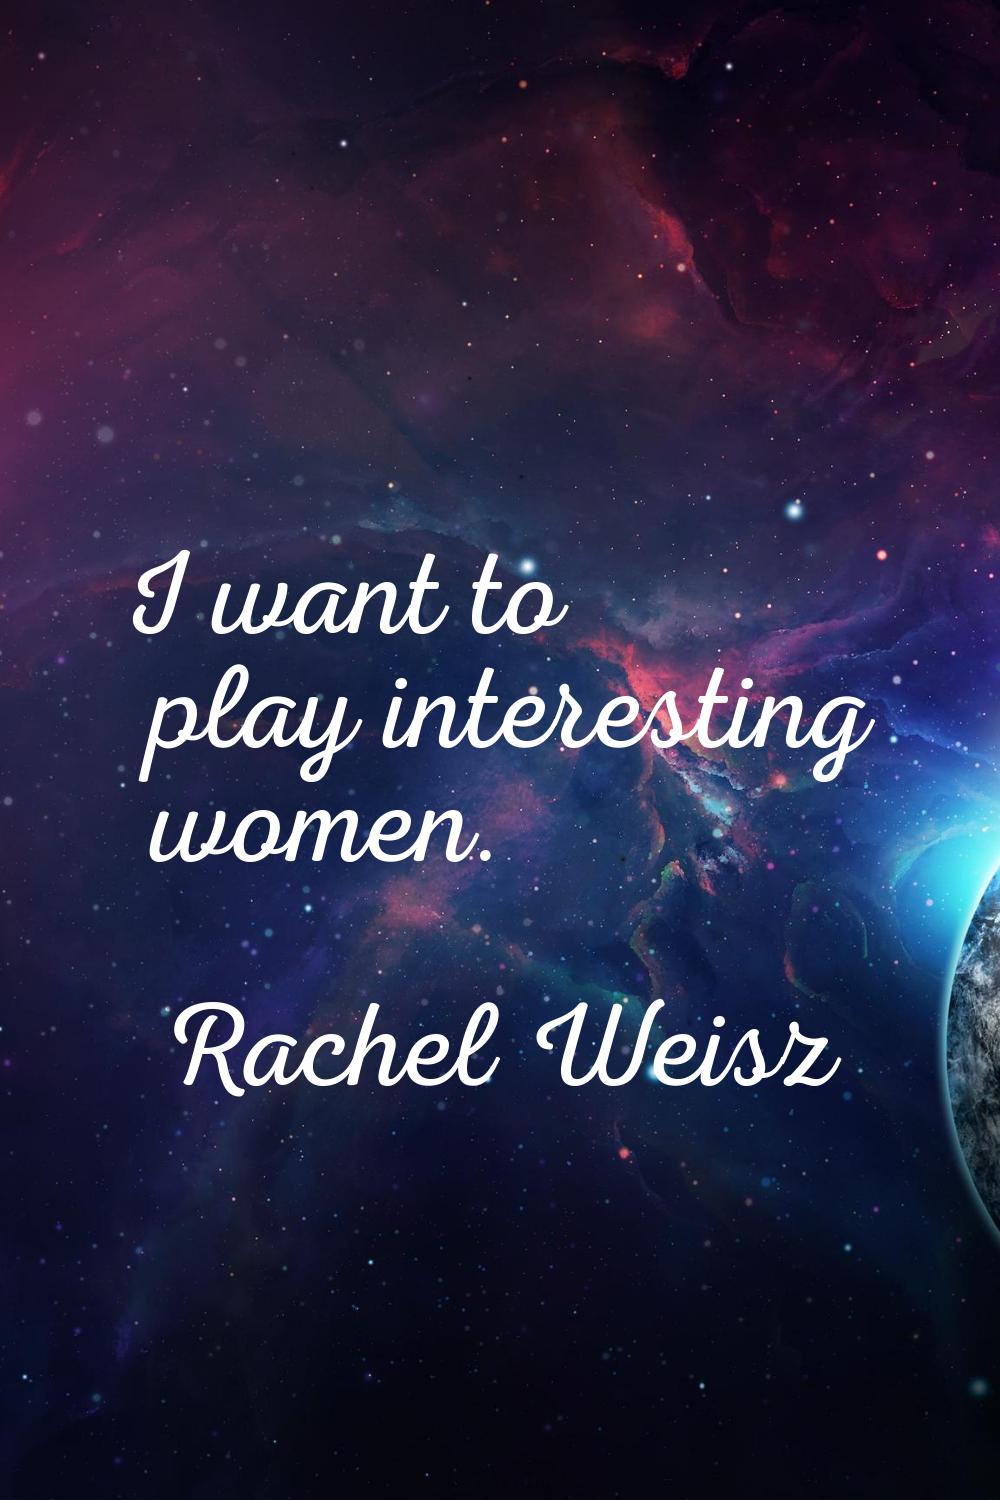 I want to play interesting women.